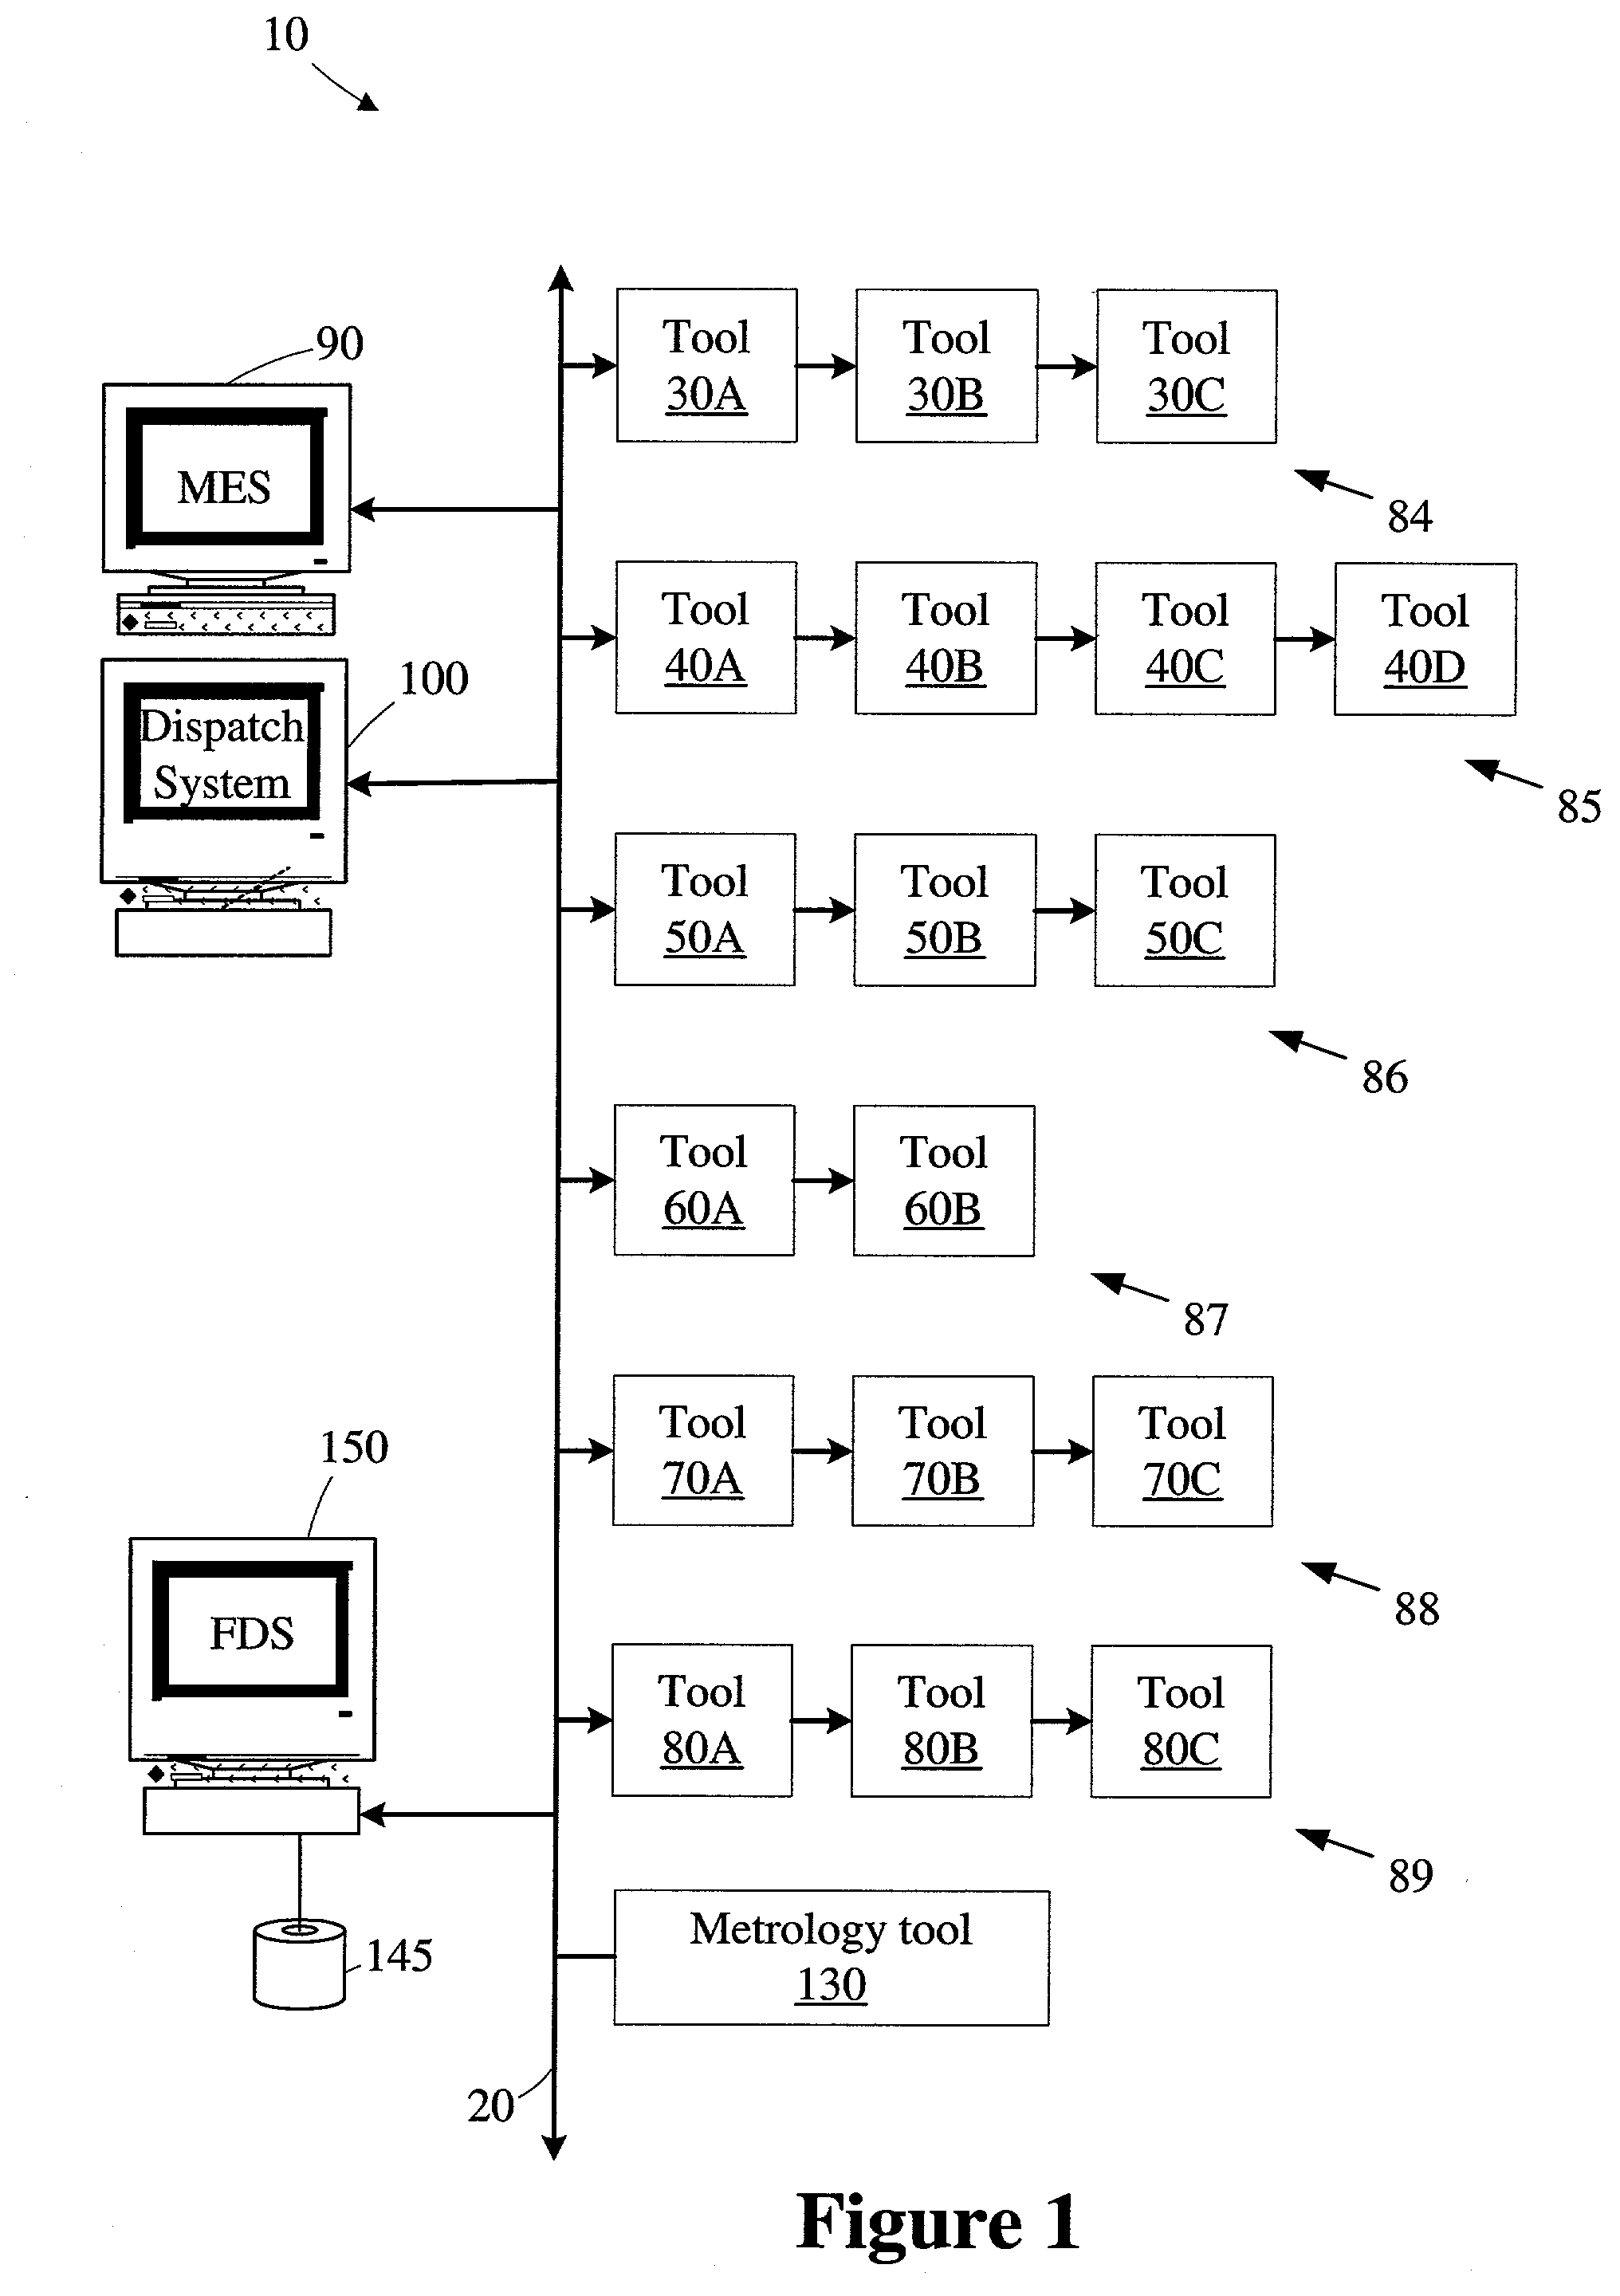 Routing workpieces based upon detecting a fault